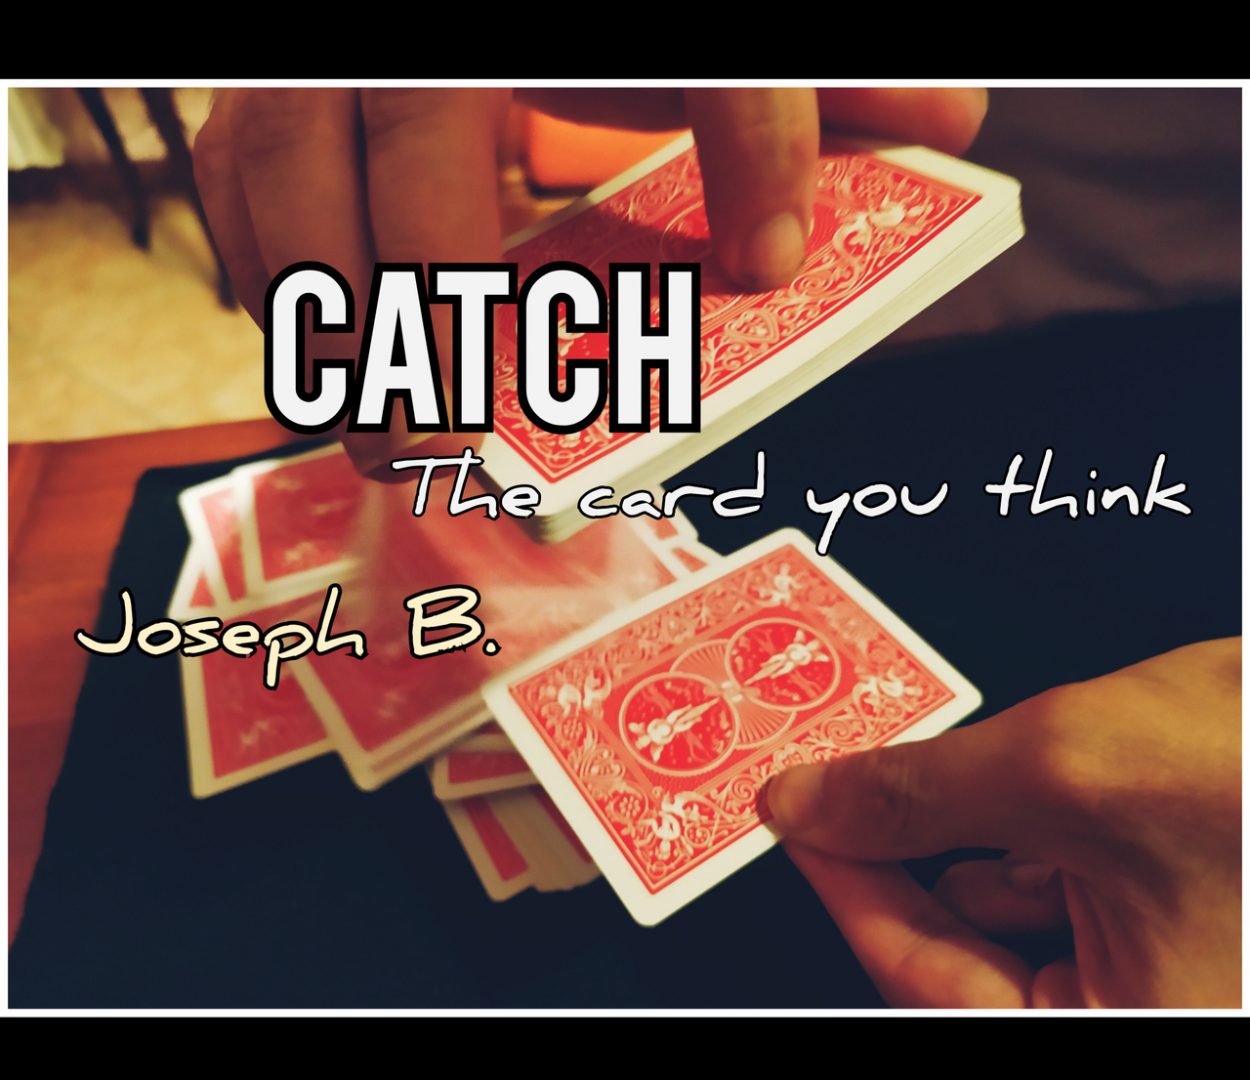 Catch ( I Catch The Card You Think) by Joseph B. (MP4 Video Download)